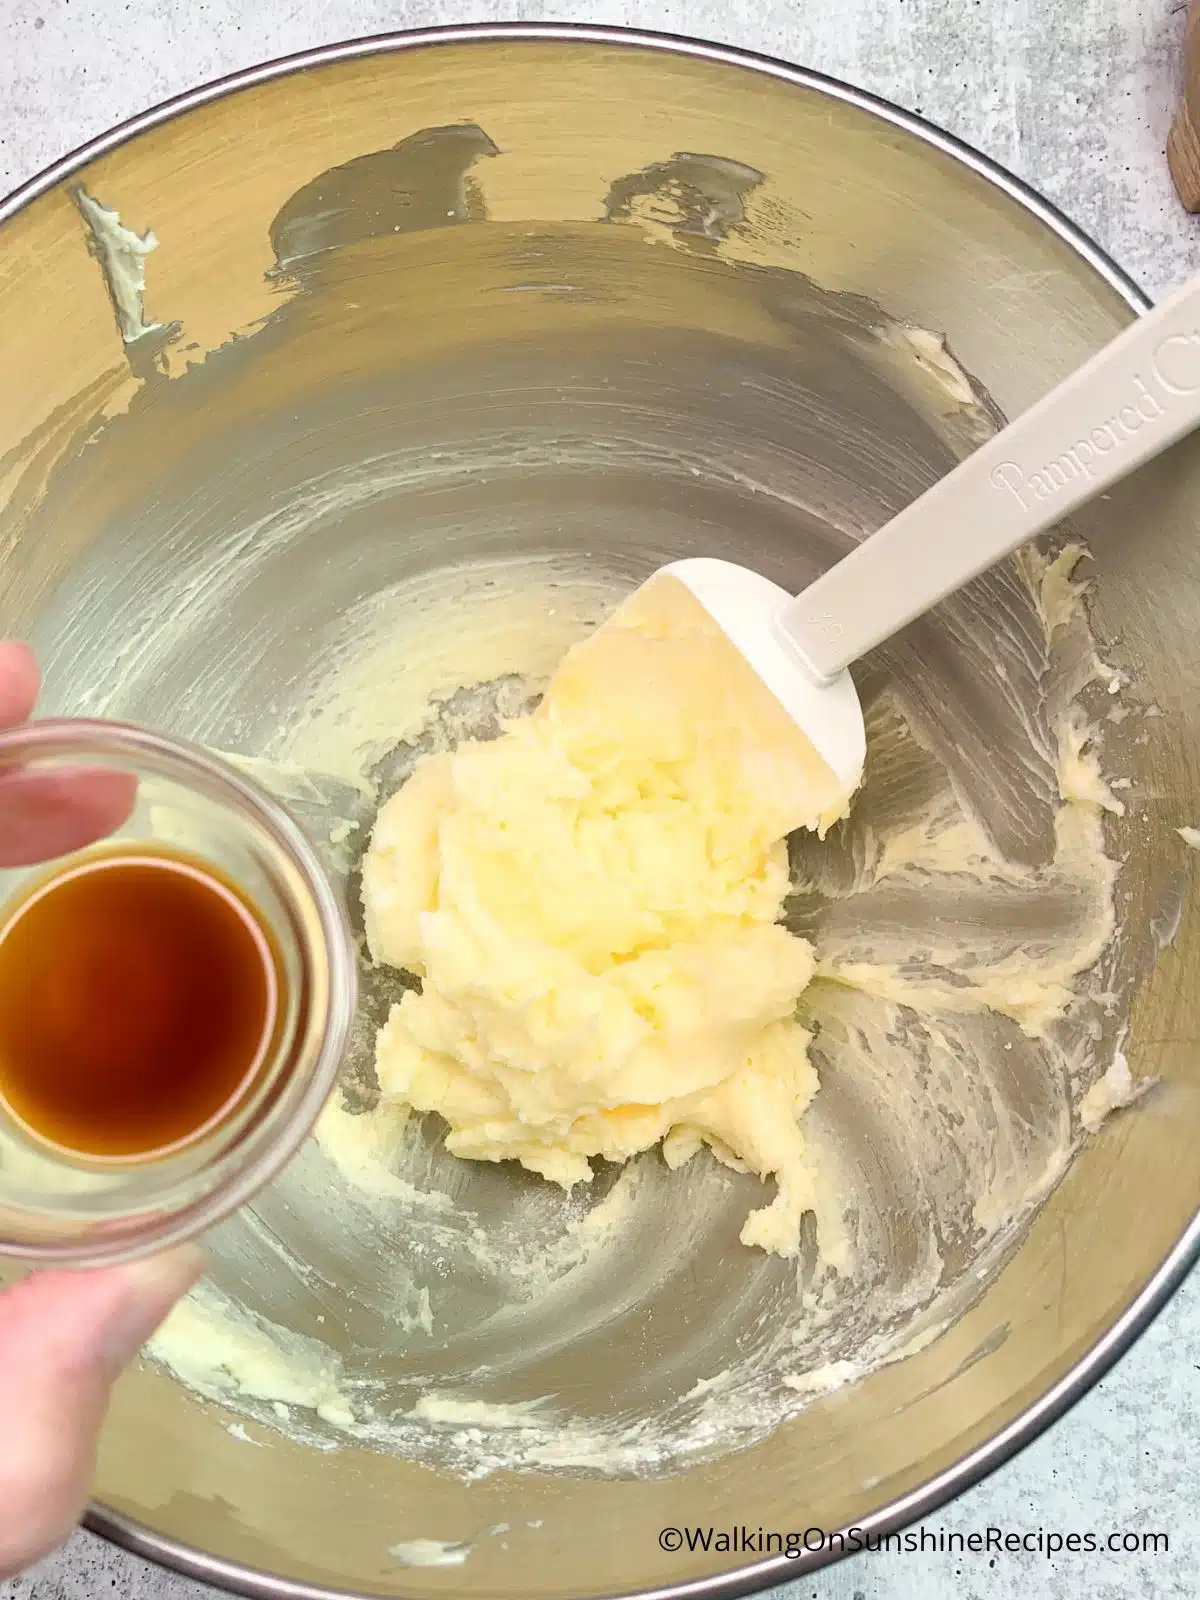 Add vanilla extract to butter mixture.